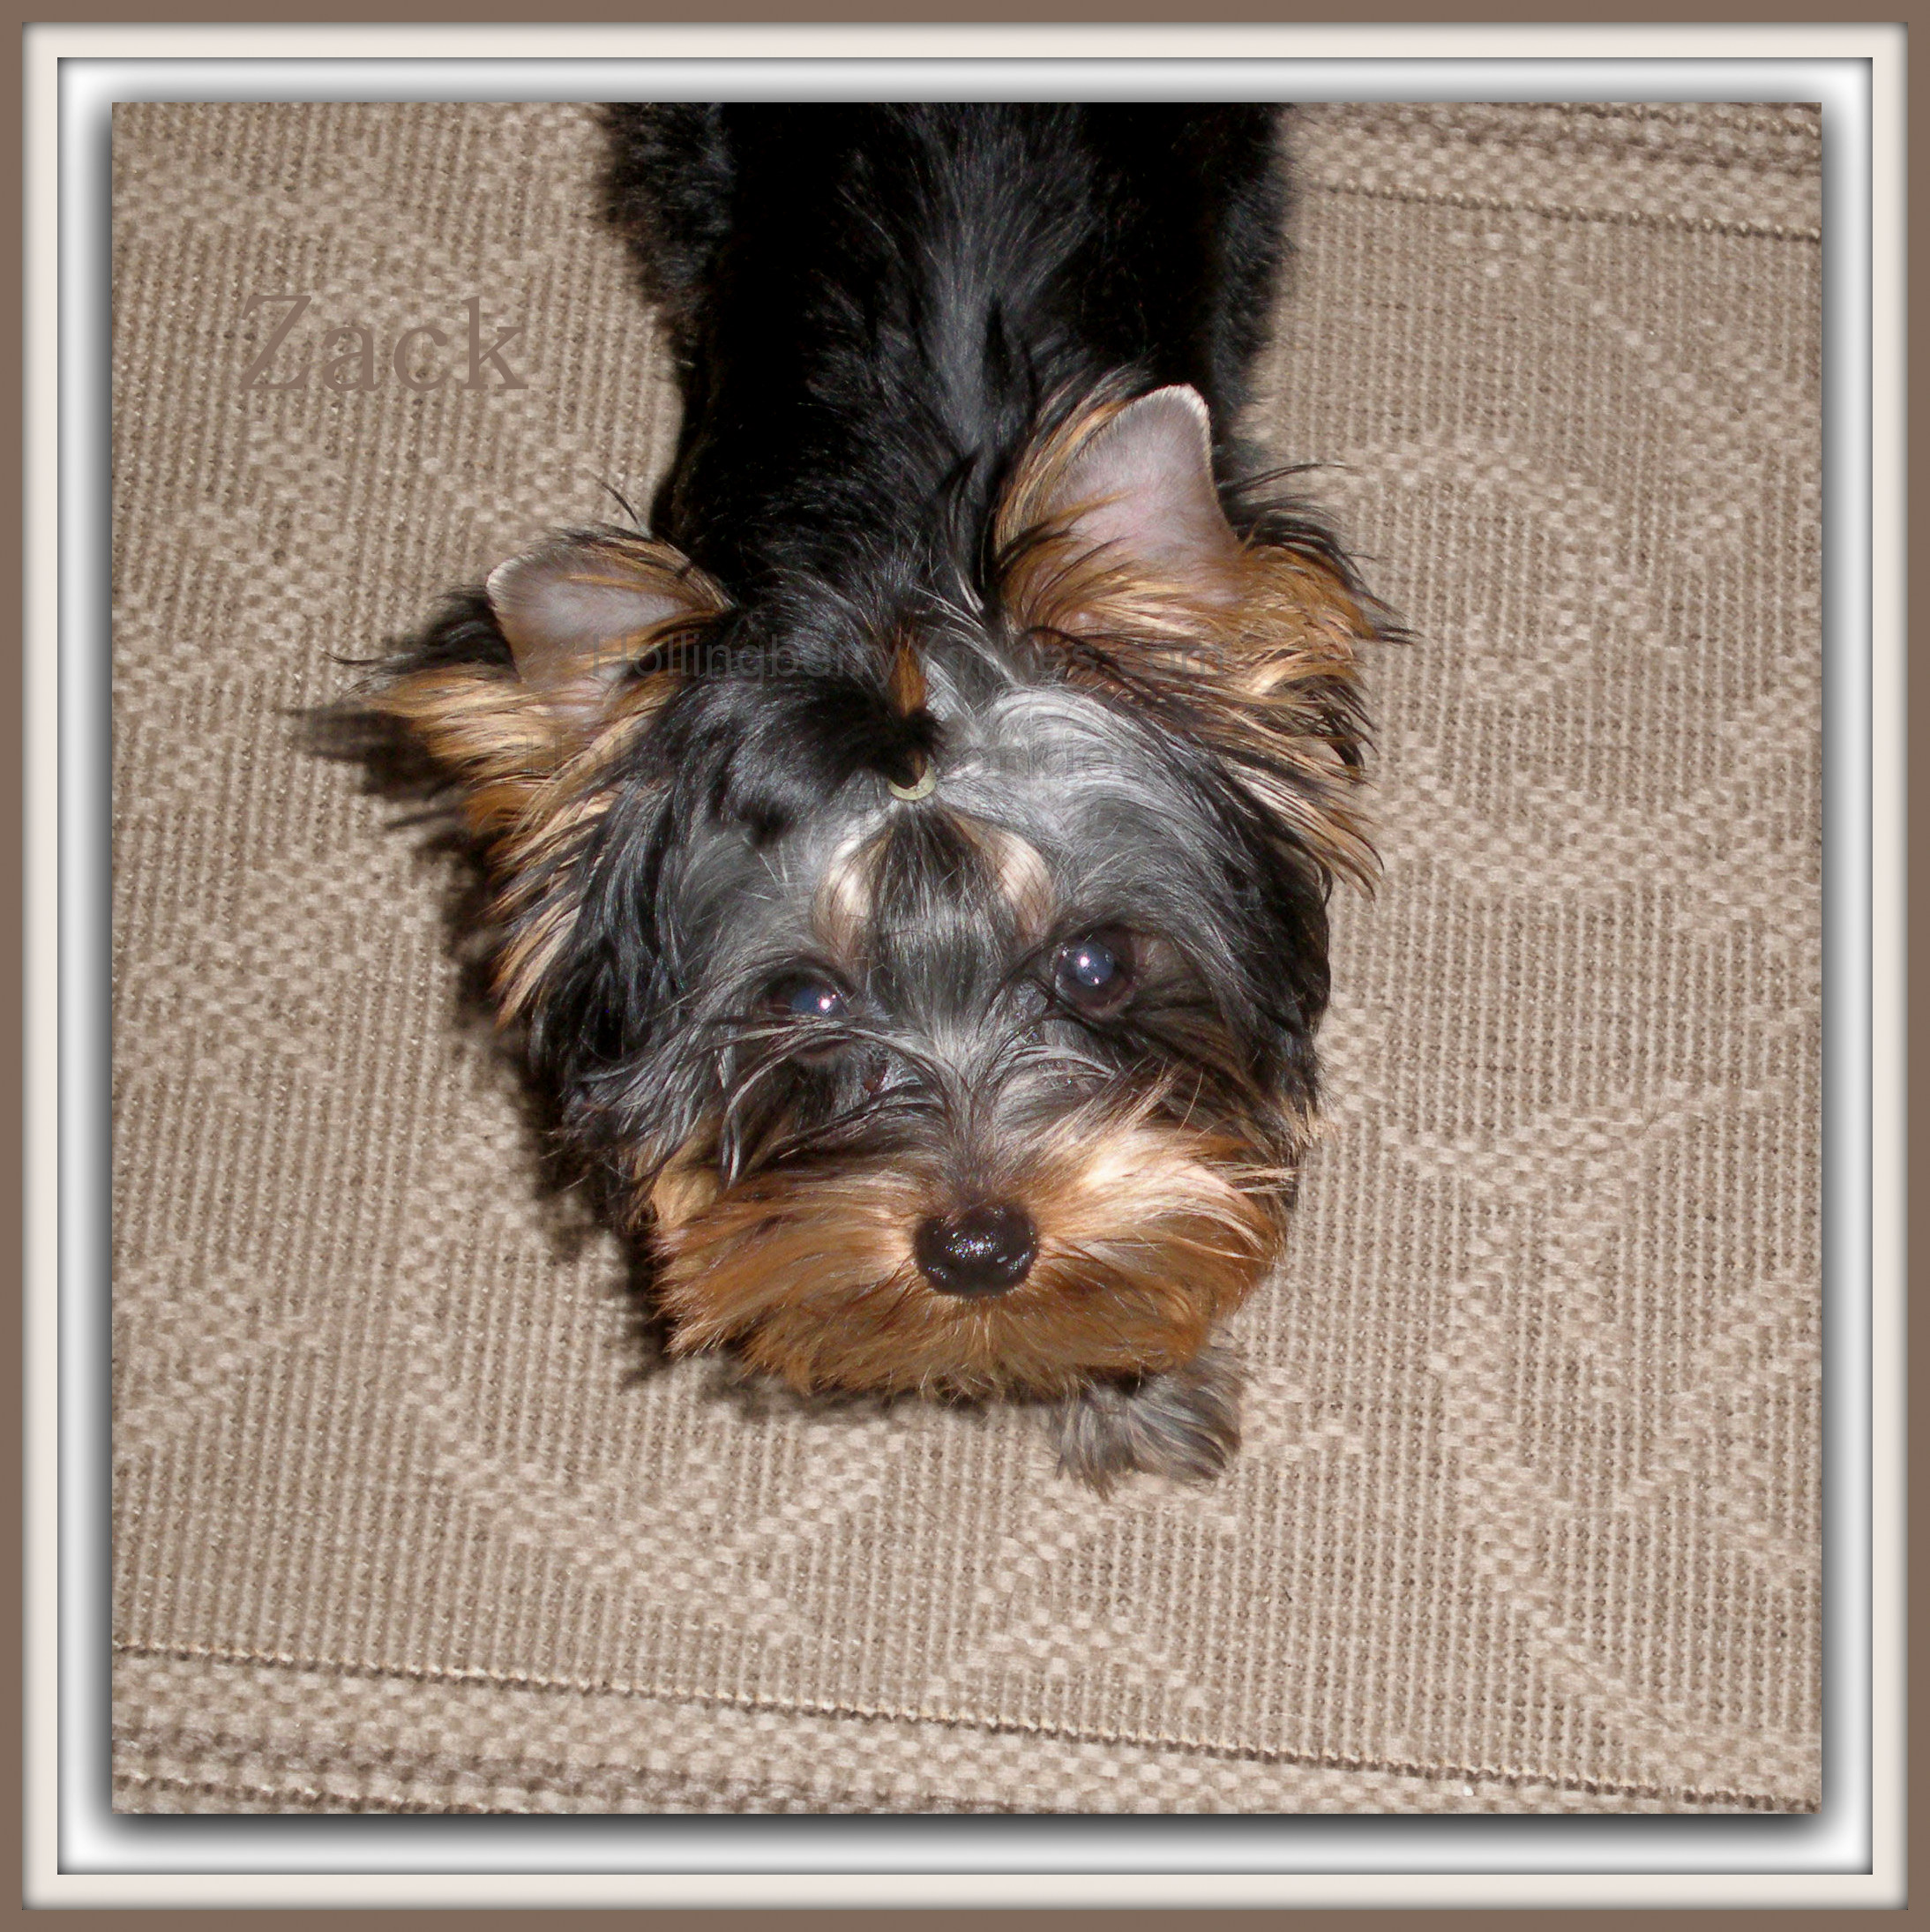 Teacup Yorkie Puppies For Sale 2013 Teacup Yorkie Puppies For